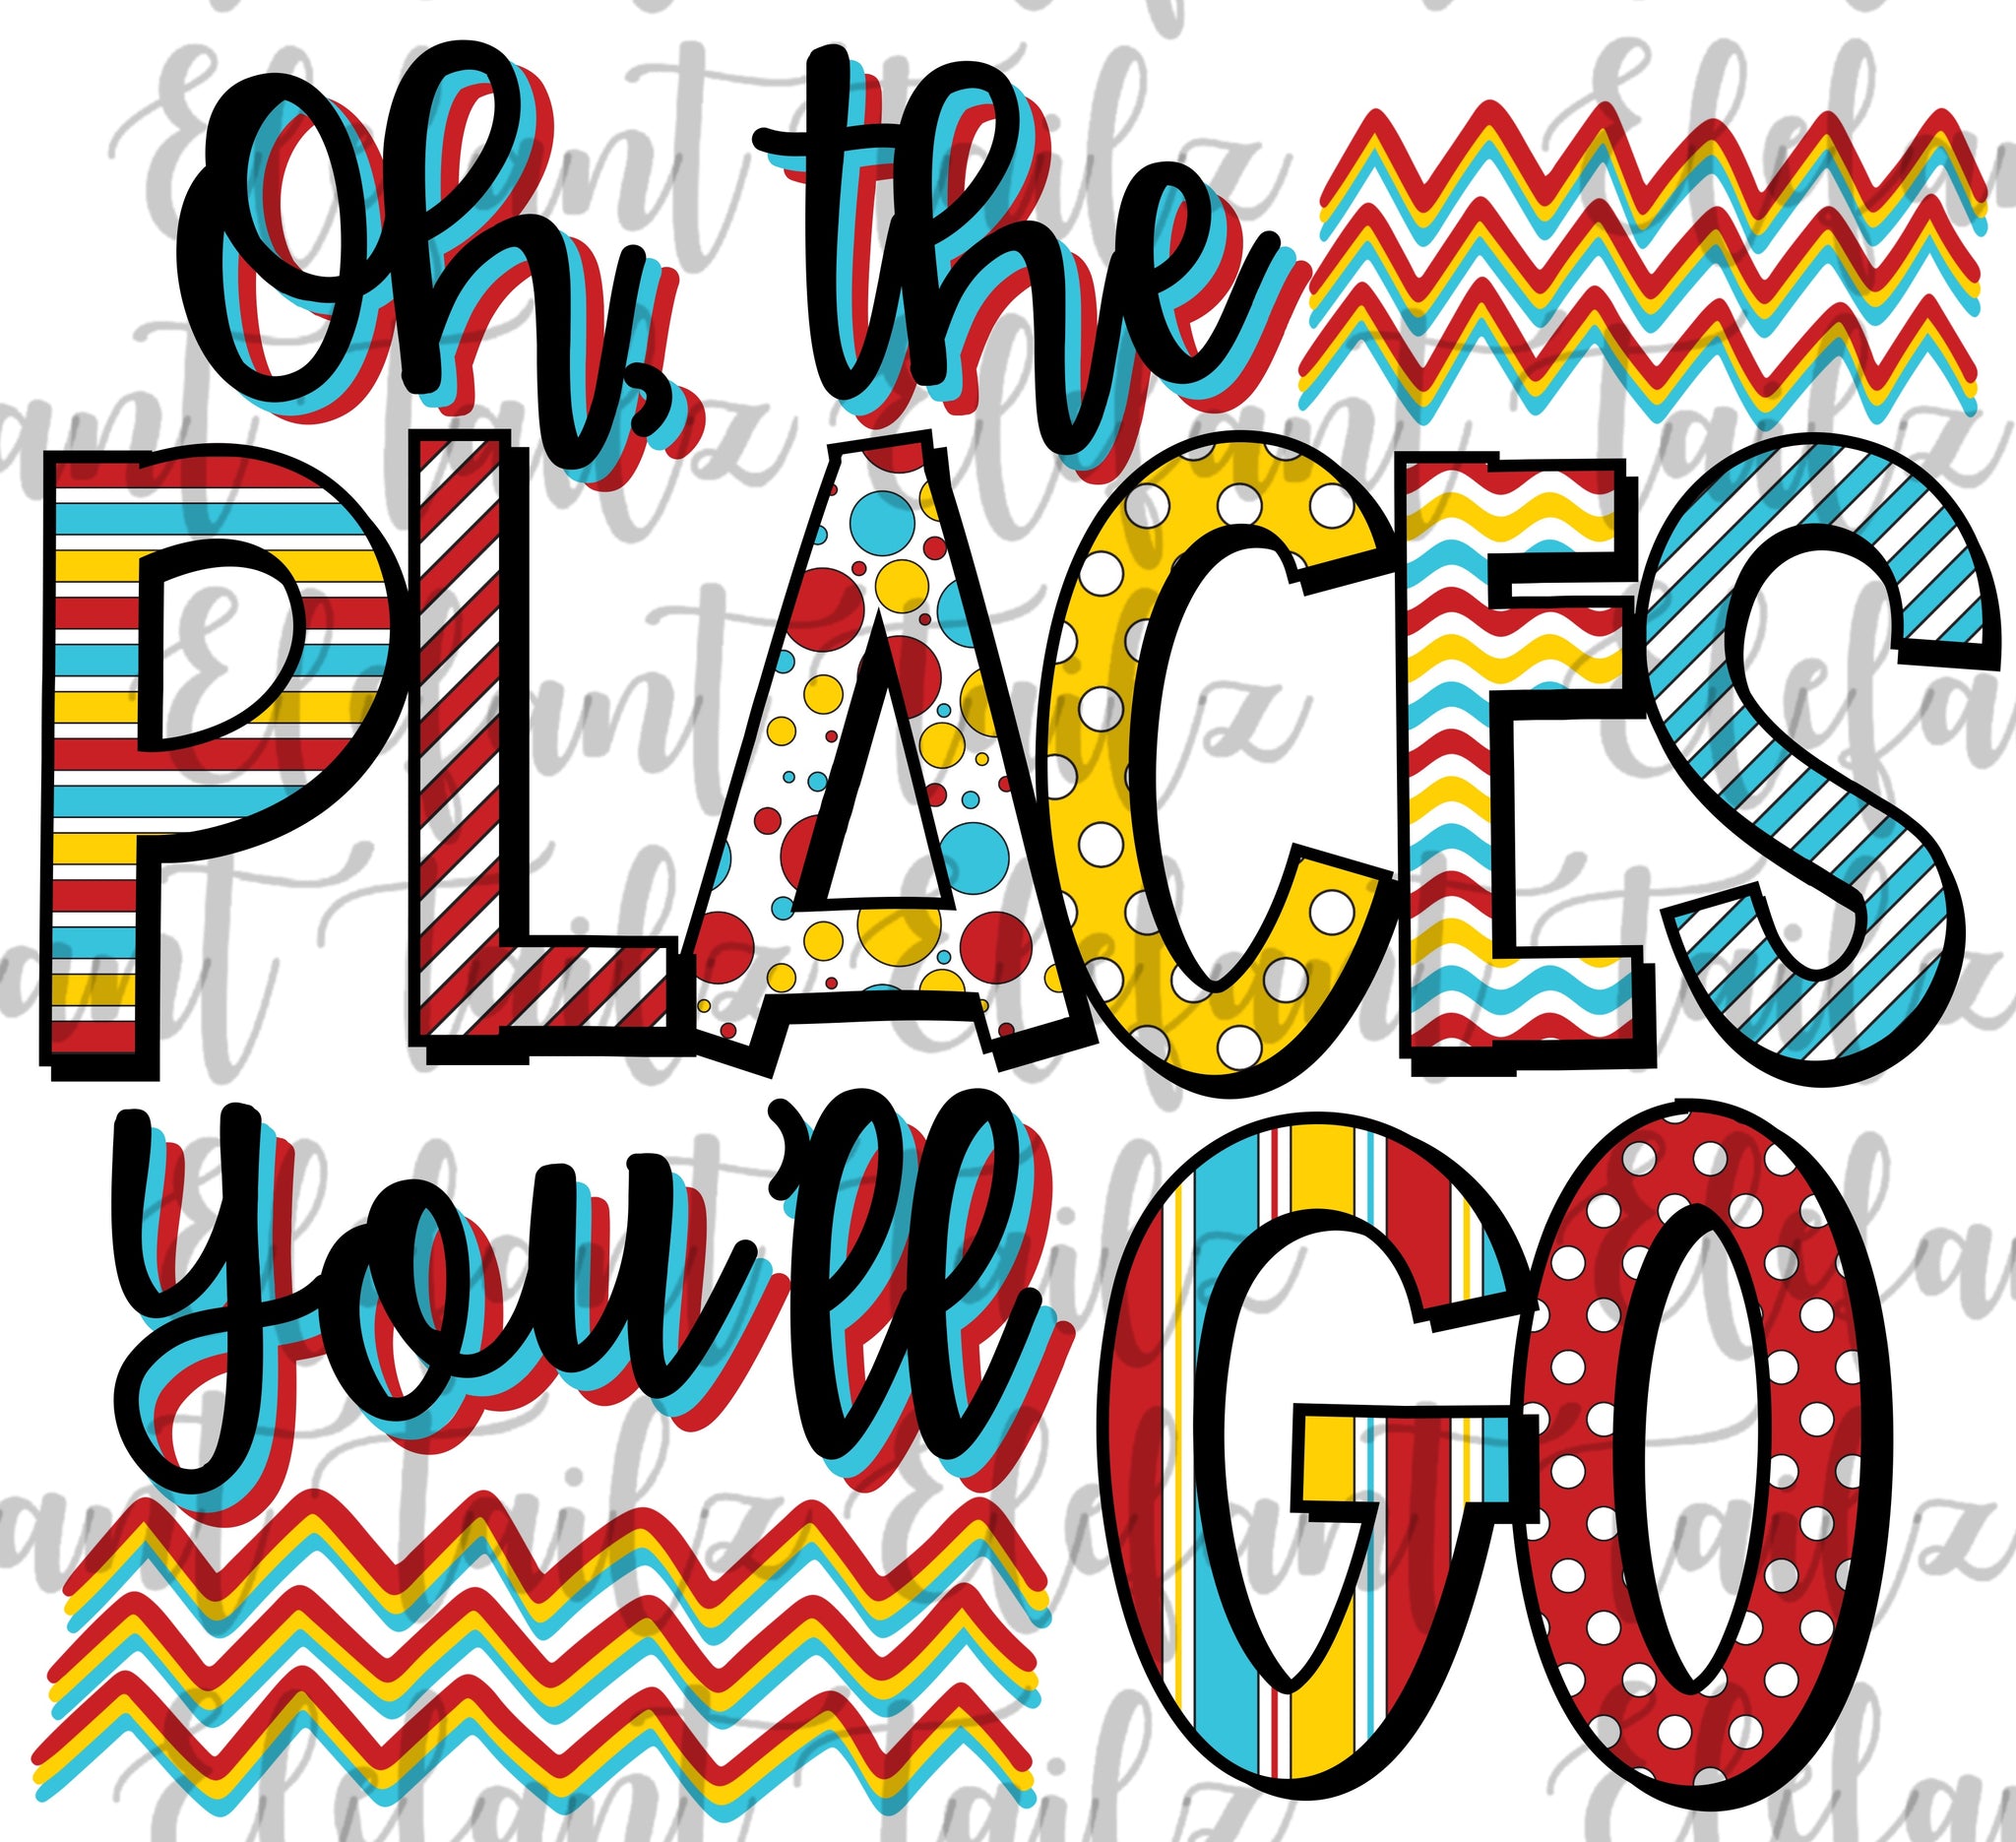 Oh Places You'll Go